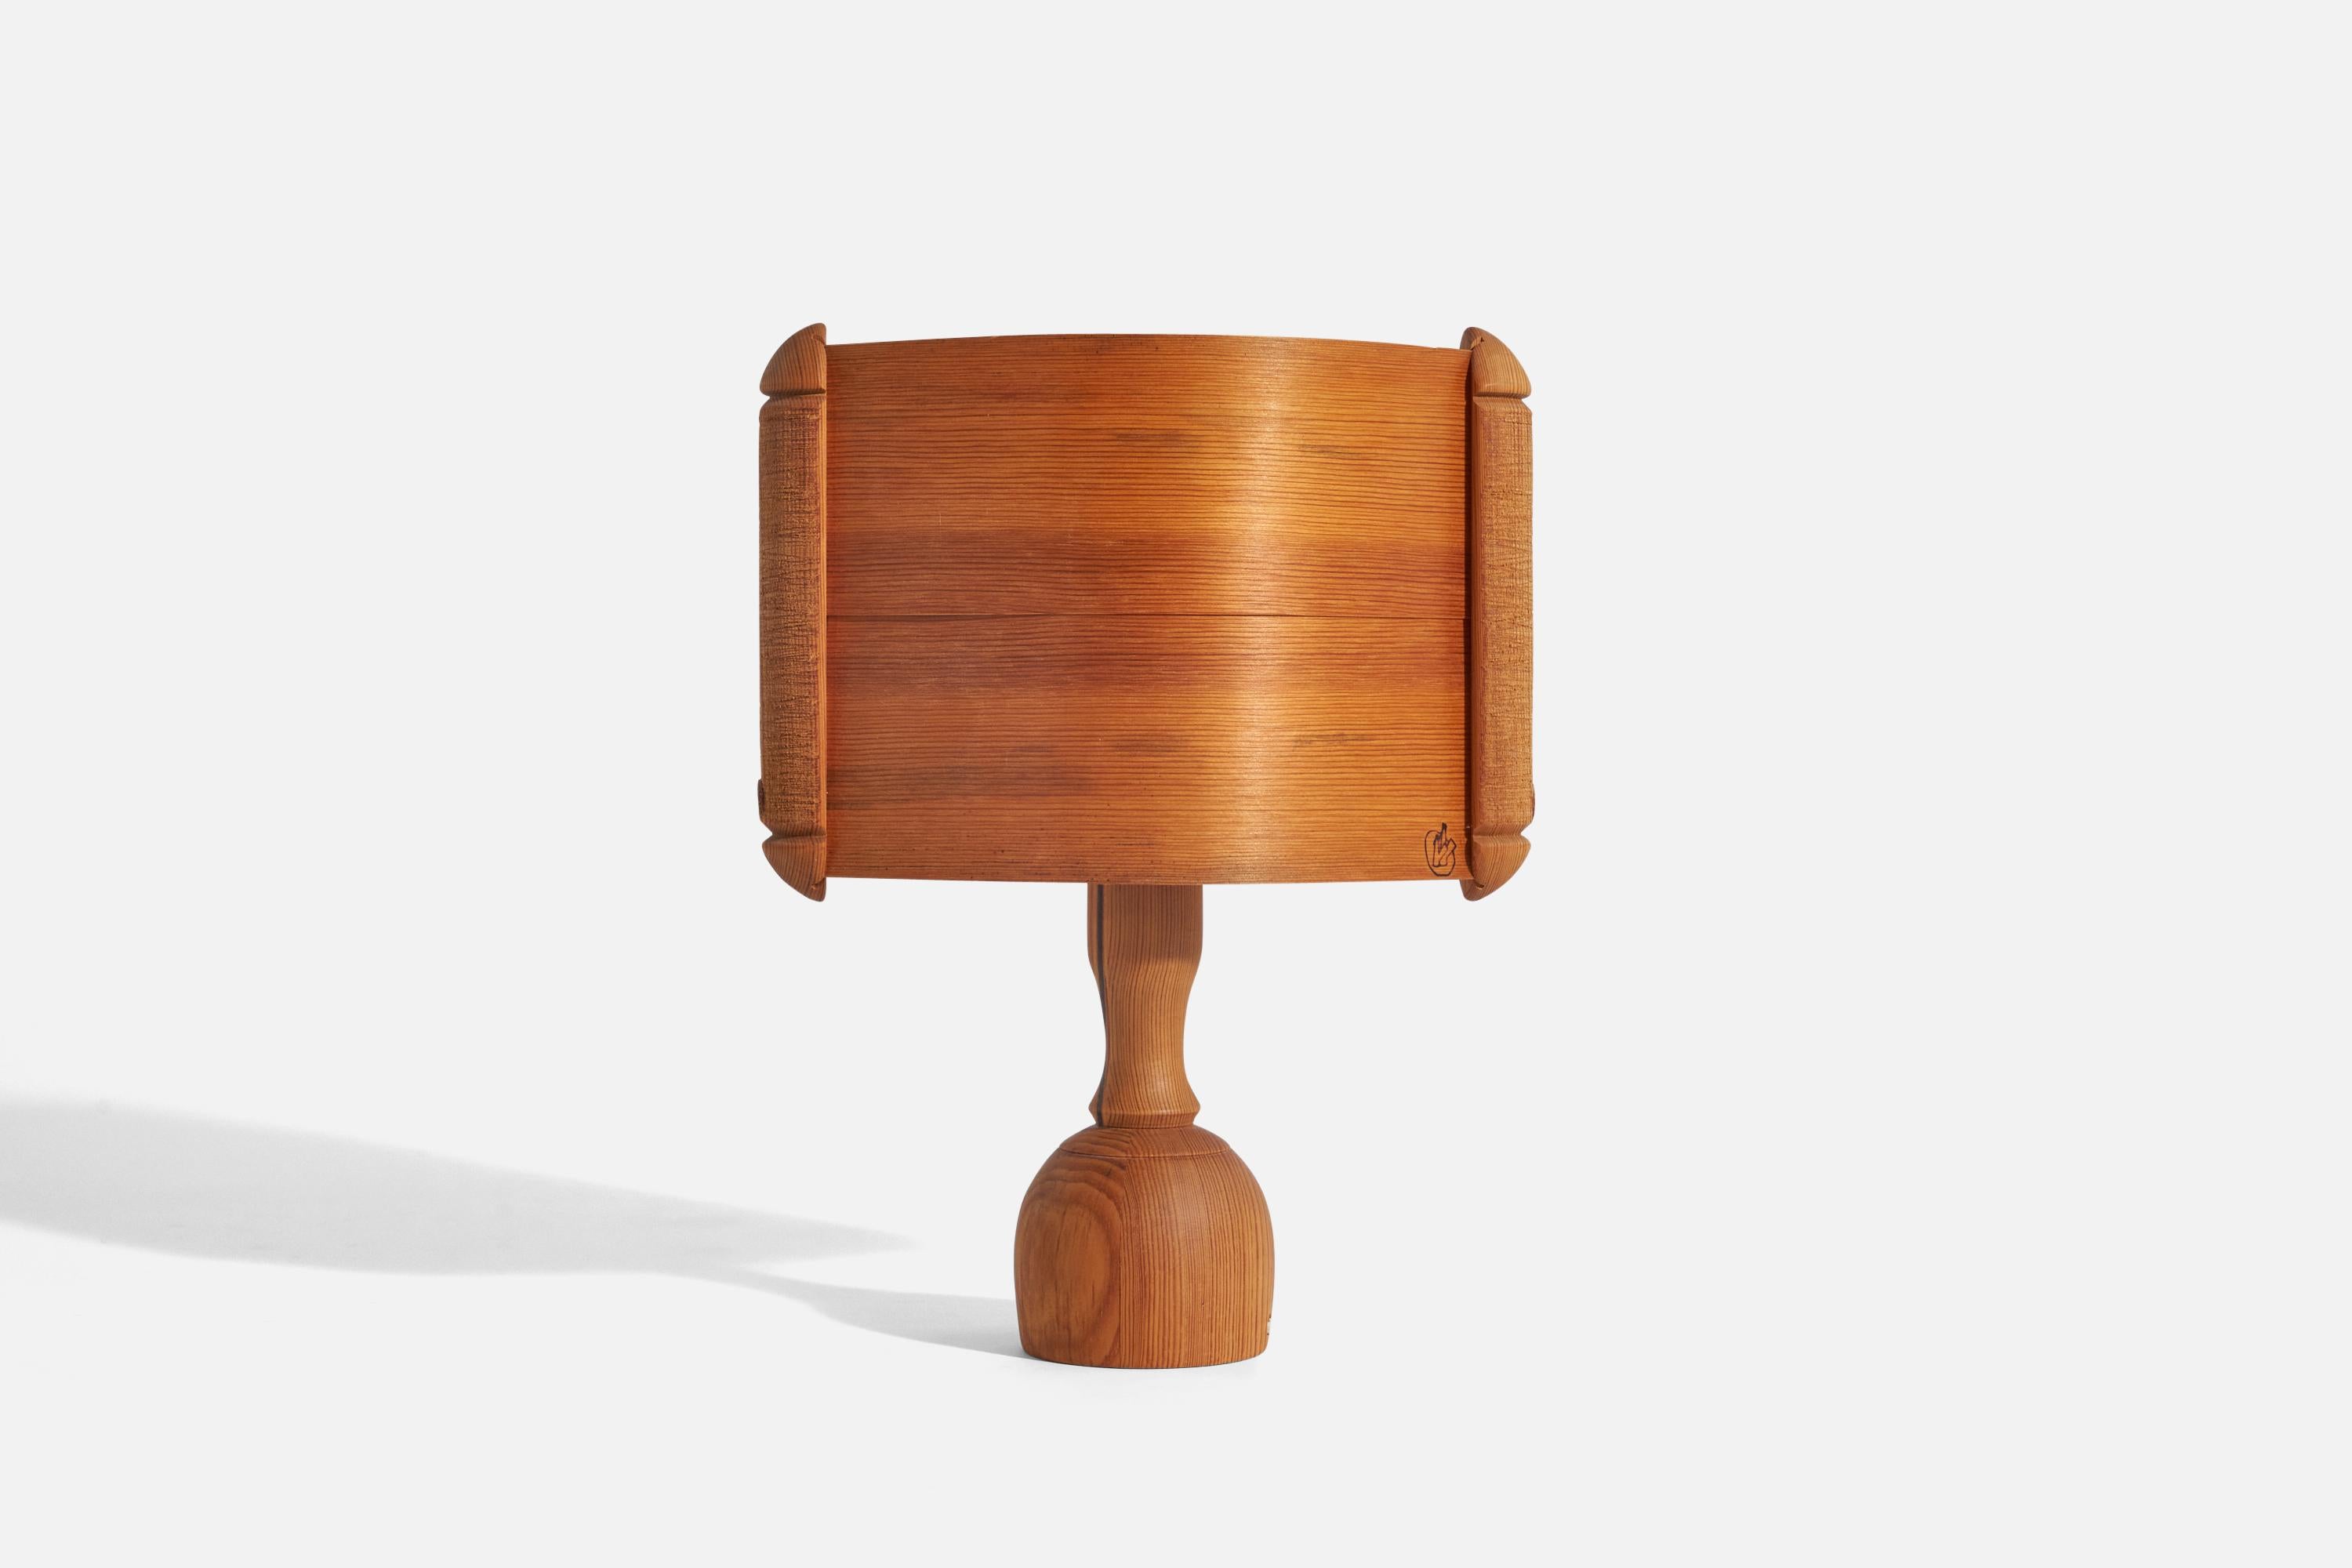 A pine and moulded pine veneer table lamp designed and produced in Sweden, 1970s.

Socket takes E-14 bulb.
There is no maximum wattage stated on the fixture.